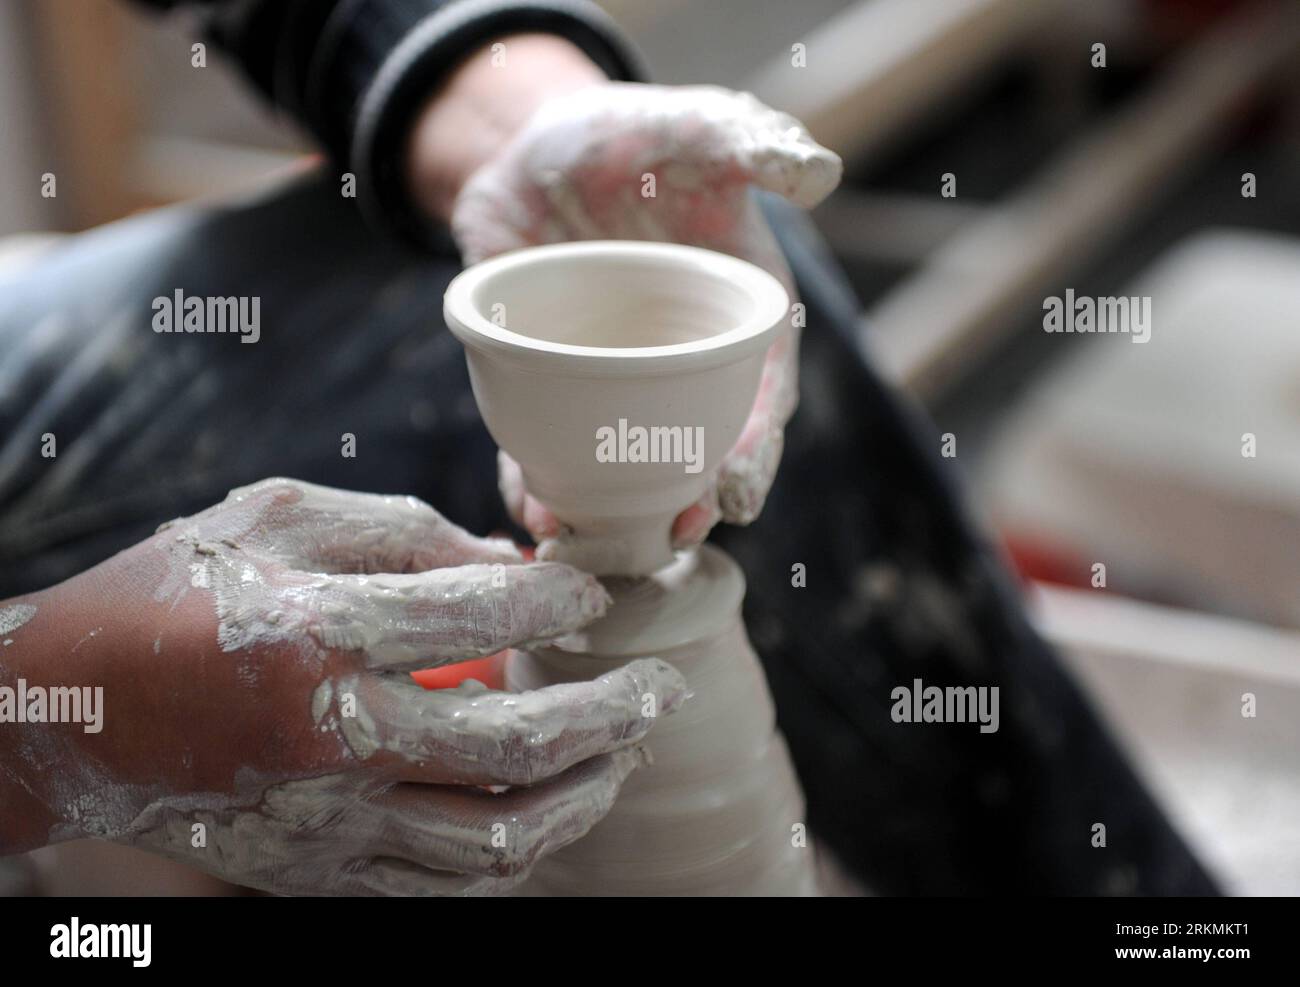 Bildnummer: 56777880  Datum: 21.12.2011  Copyright: imago/Xinhua (111223) -- JINGDEZHEN, Dec. 23, 2011 (Xinhua) -- A worker throws a cup from a ball of clay at a procelain workshop in Porcelain Capital Jingdezhen City, east China s Jiangxi Province, Dec. 21, 2011. Jingdezhen s percelain has been famous not only in China but in time it became known internationally for being as thin as paper, as white as jade, as bright as a mirror, and as sound as a bell. (Xinhua/Zhou Ke) (lfj) CHINA-JIANGXI-JINGDEZHEN-PORCELAIN (CN) PUBLICATIONxNOTxINxCHN Wirtschaft Porzellan Arbeitswelten Handwerk xda x0x 201 Stock Photo